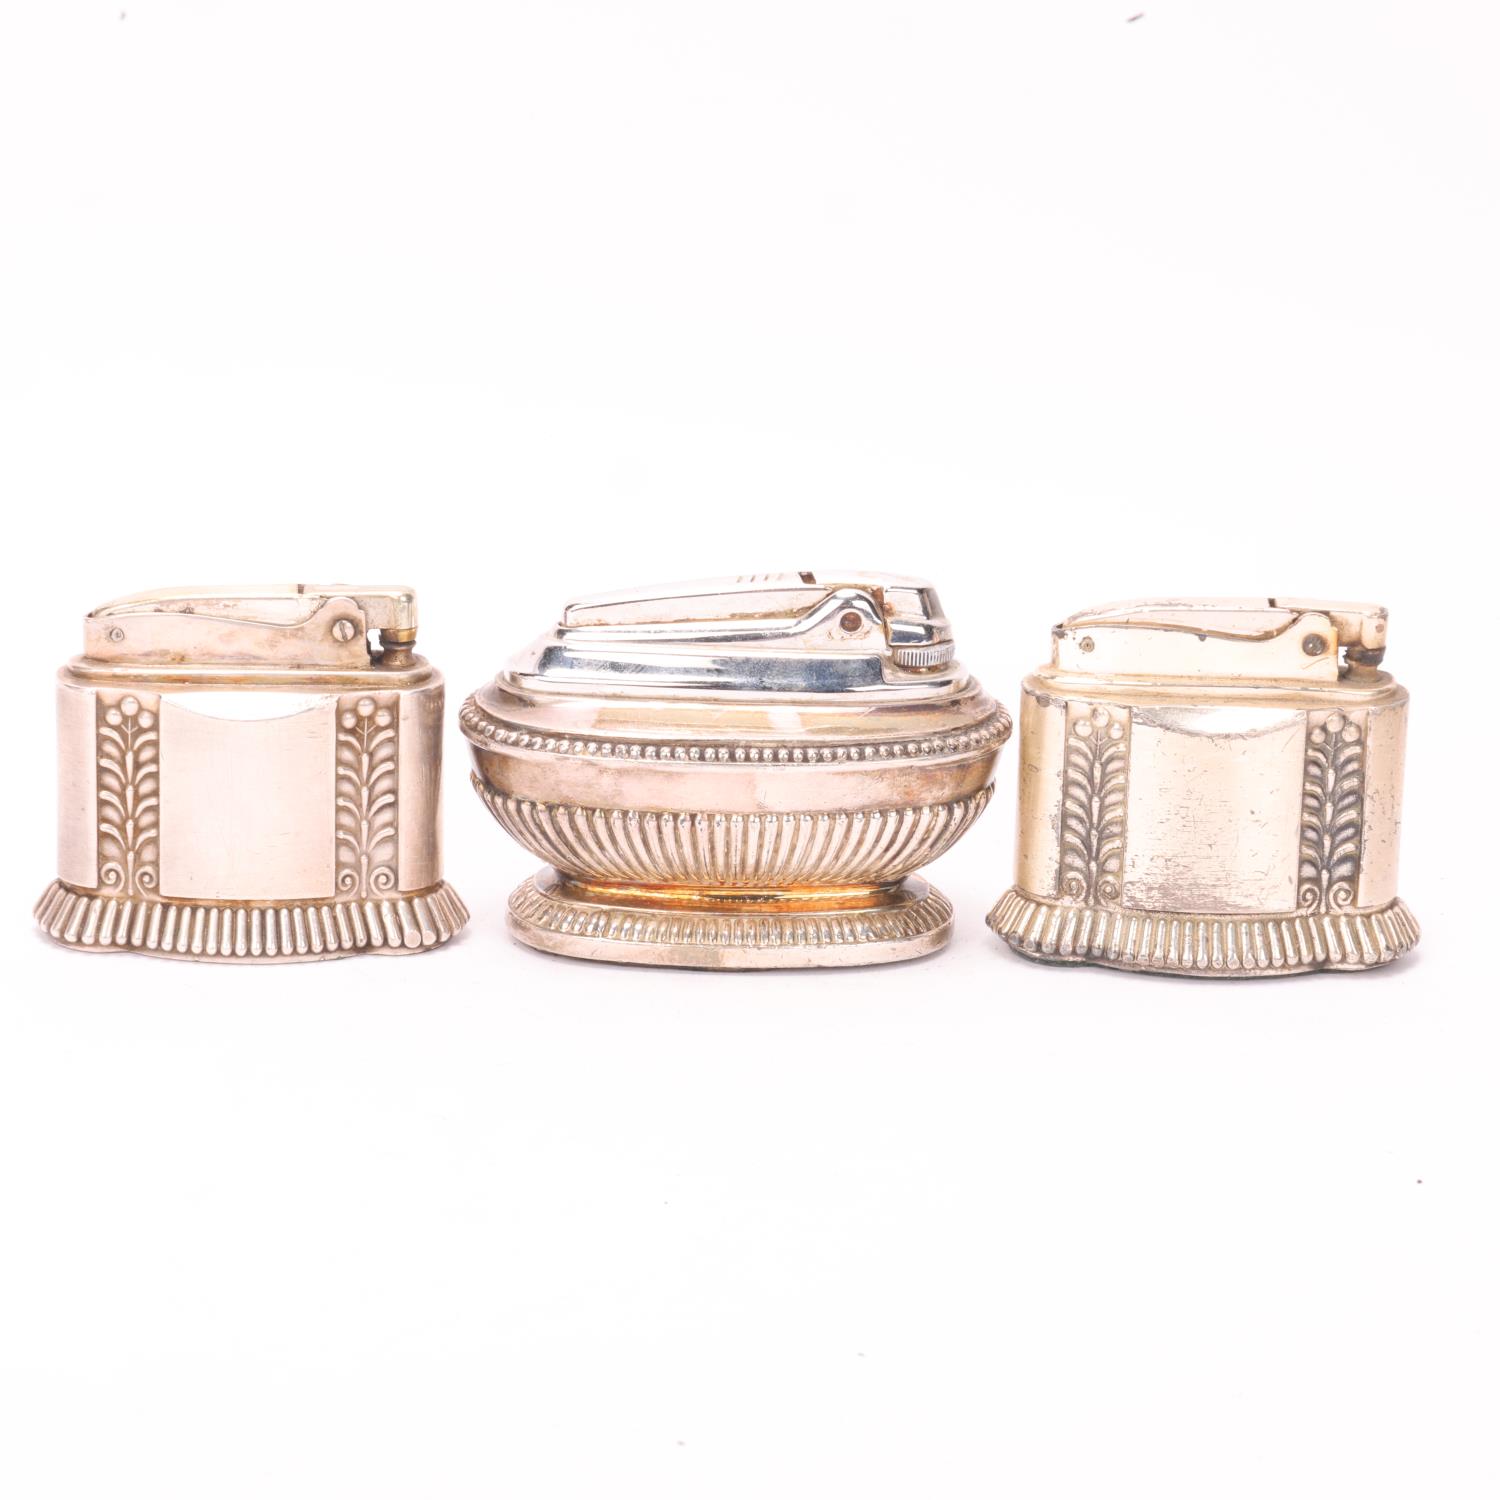 3 vintage Ronson silver plated table lighters, 2 "Diana" models and 1 other Both Diana models appear - Bild 2 aus 4